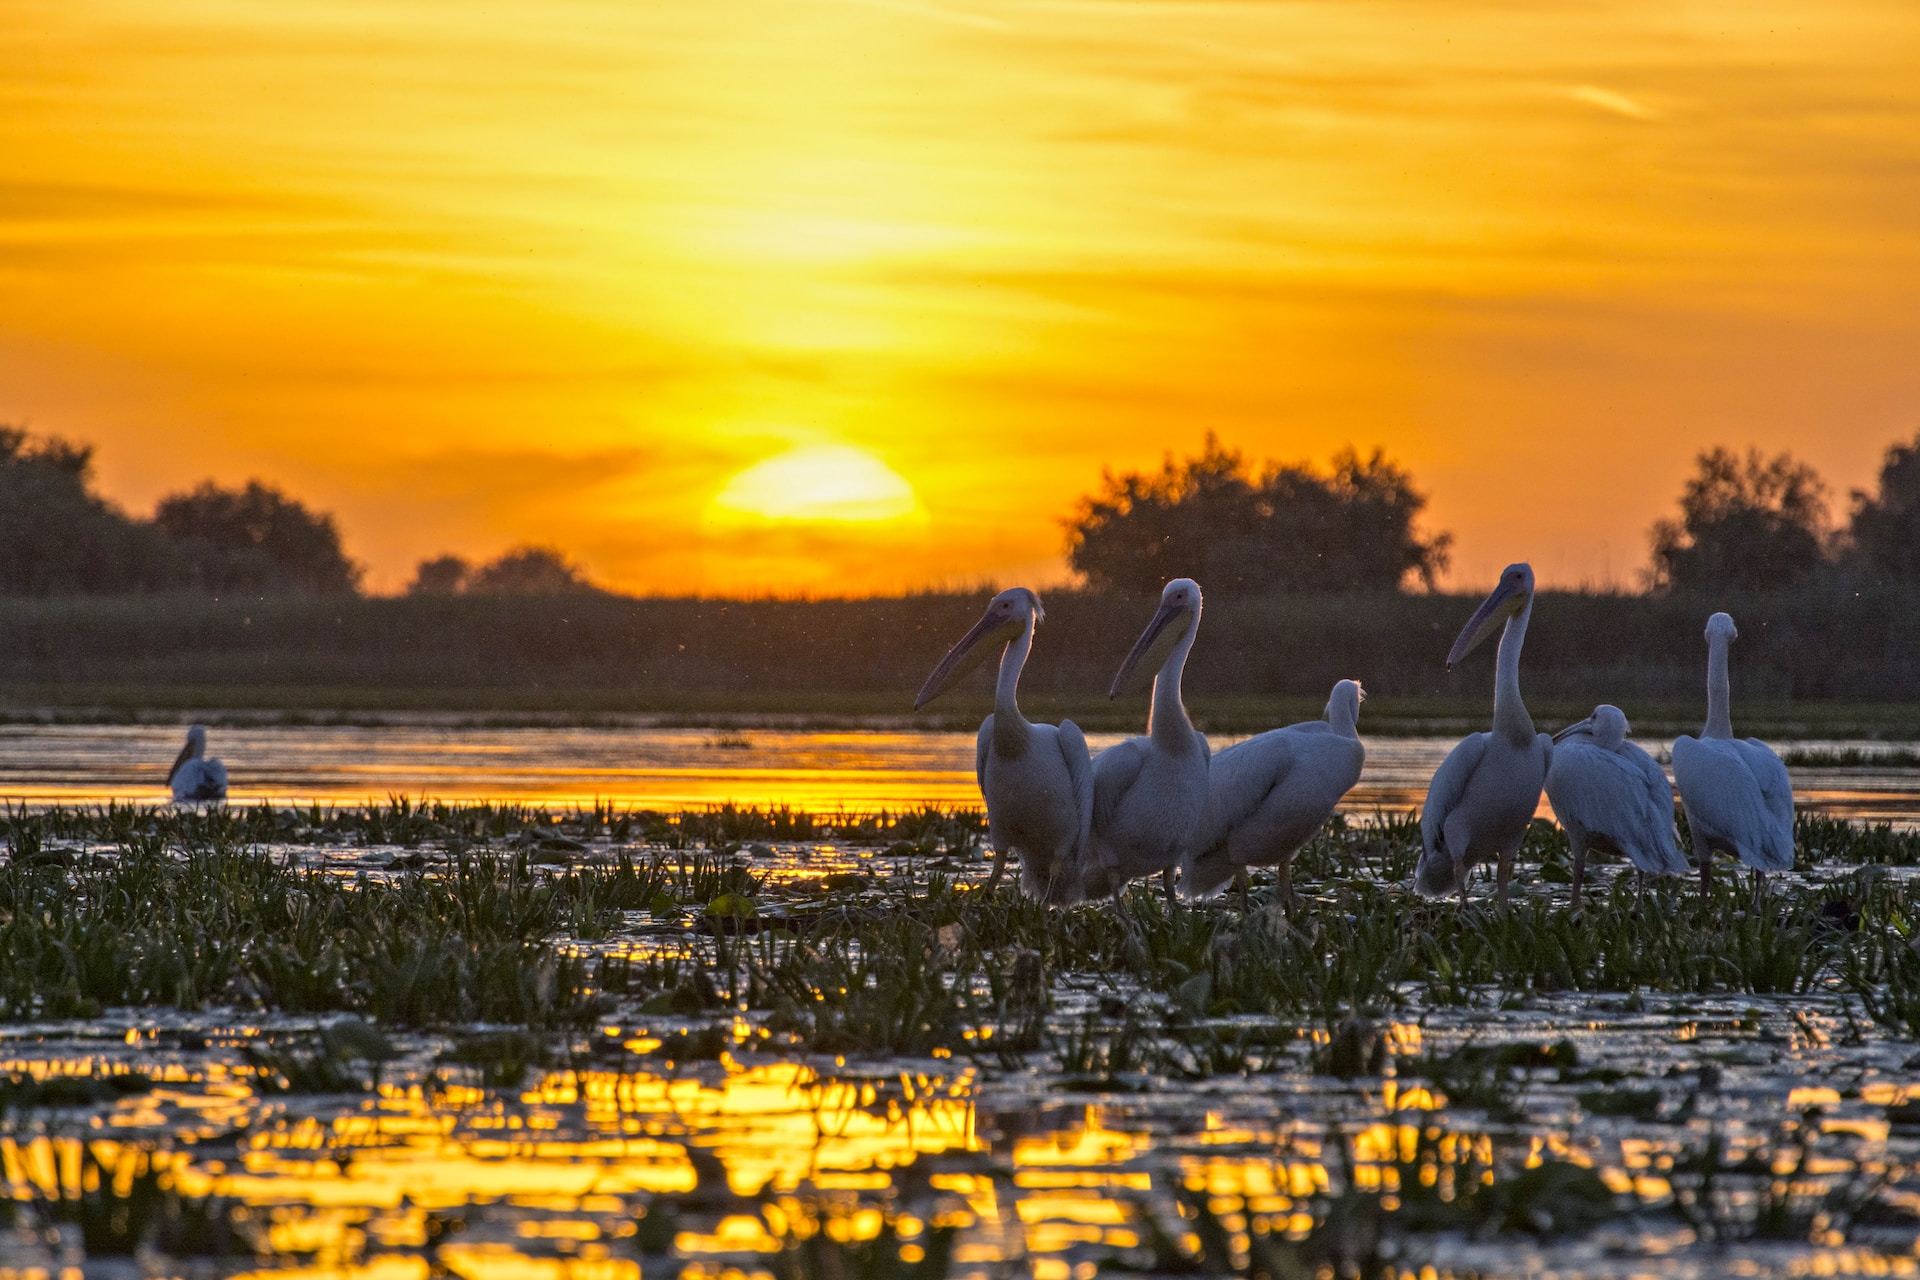 Danube Delta | The life of birds wakes up